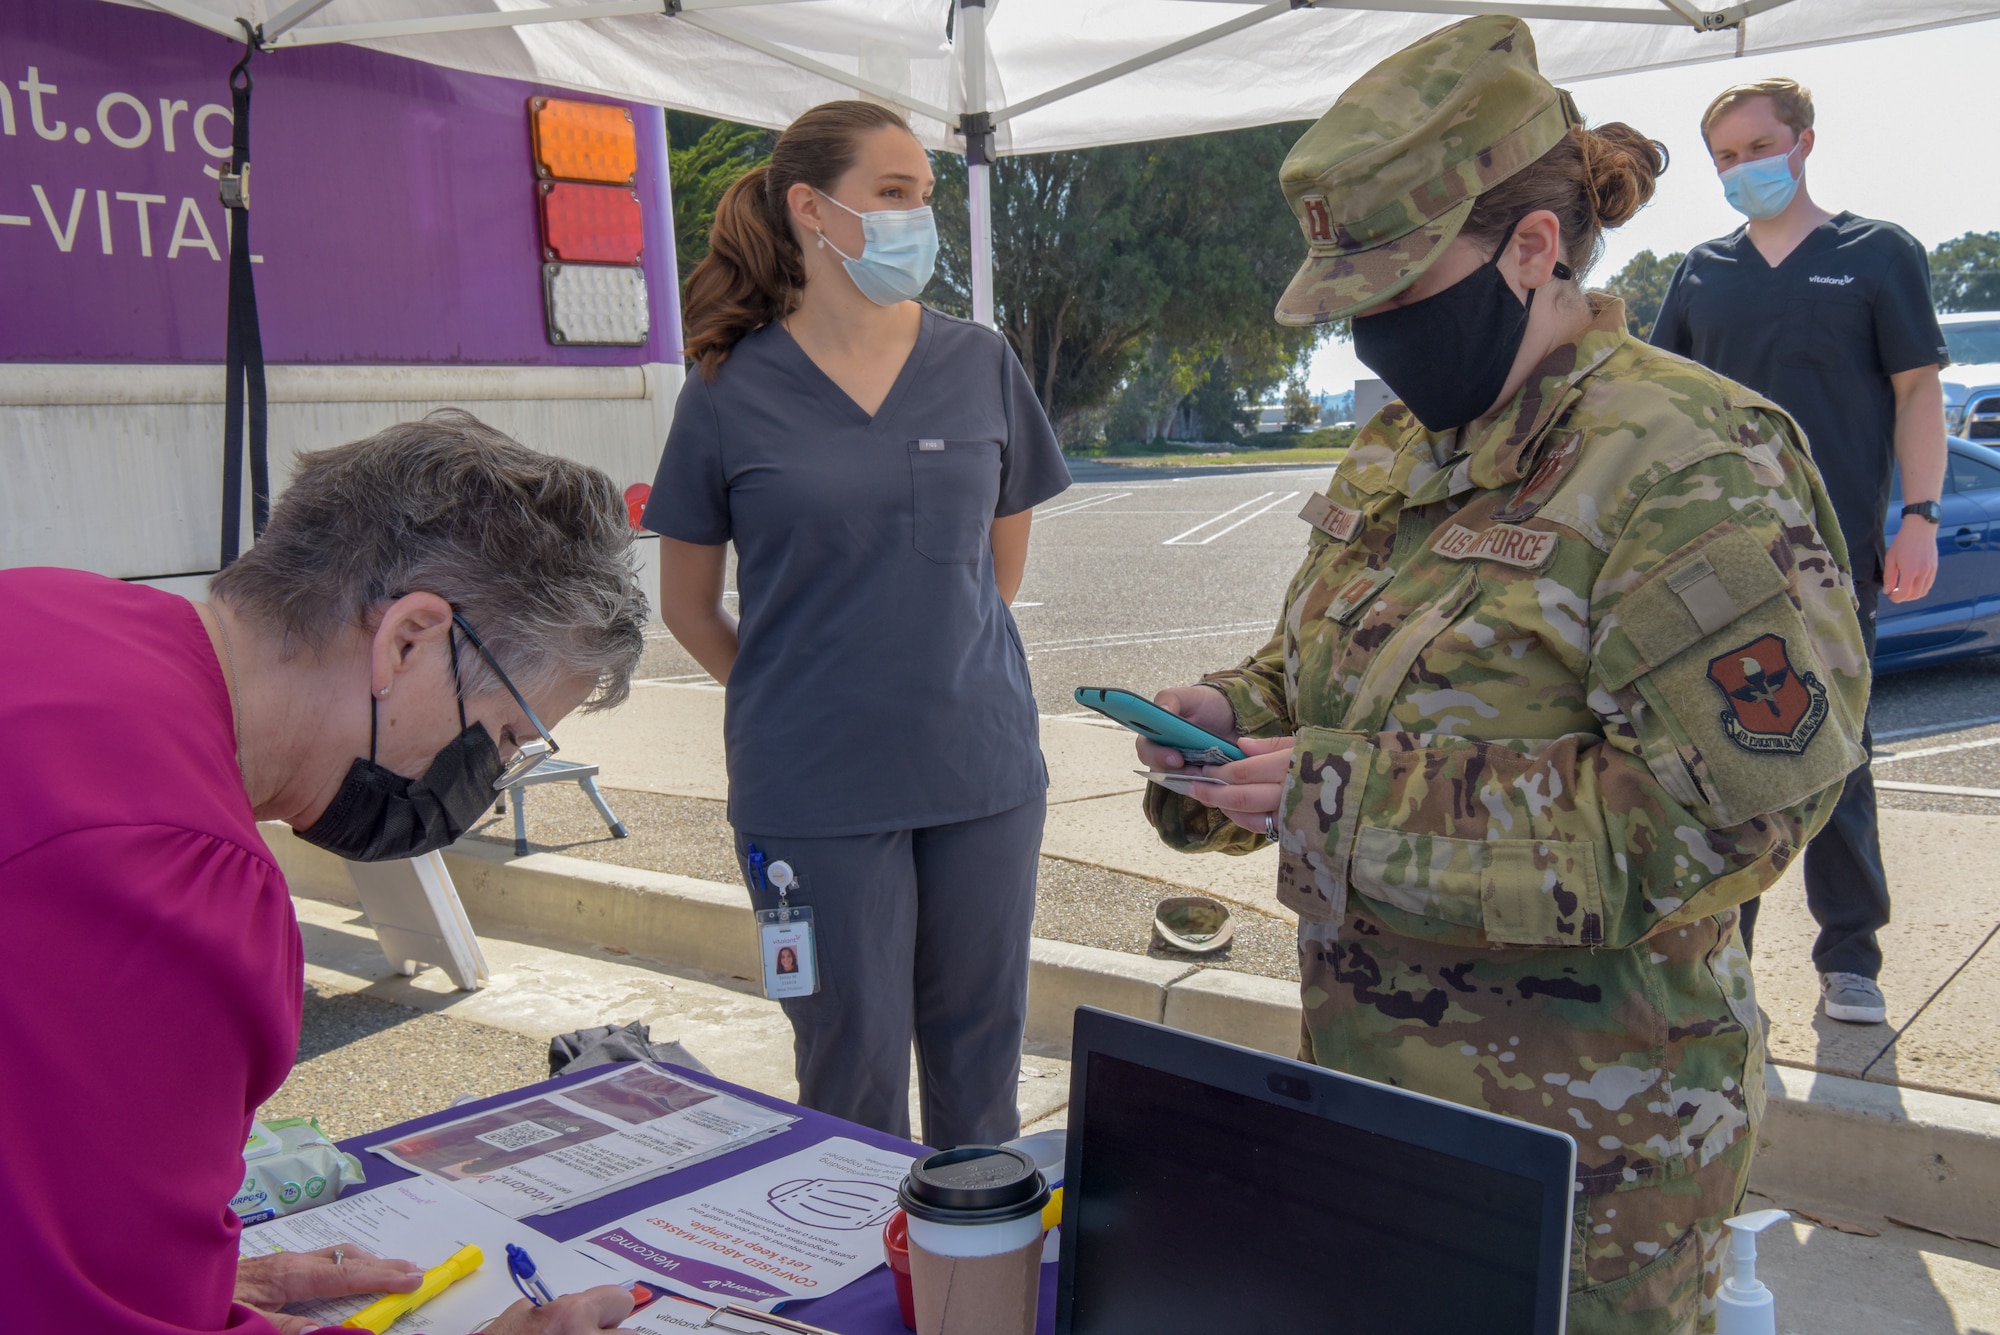 Community members come to Vitalant’s mobile clinic to donate blood at the first blood drive since the start of the pandemic on Vandenberg Space Force Base, California, Aug. 10, 2021.